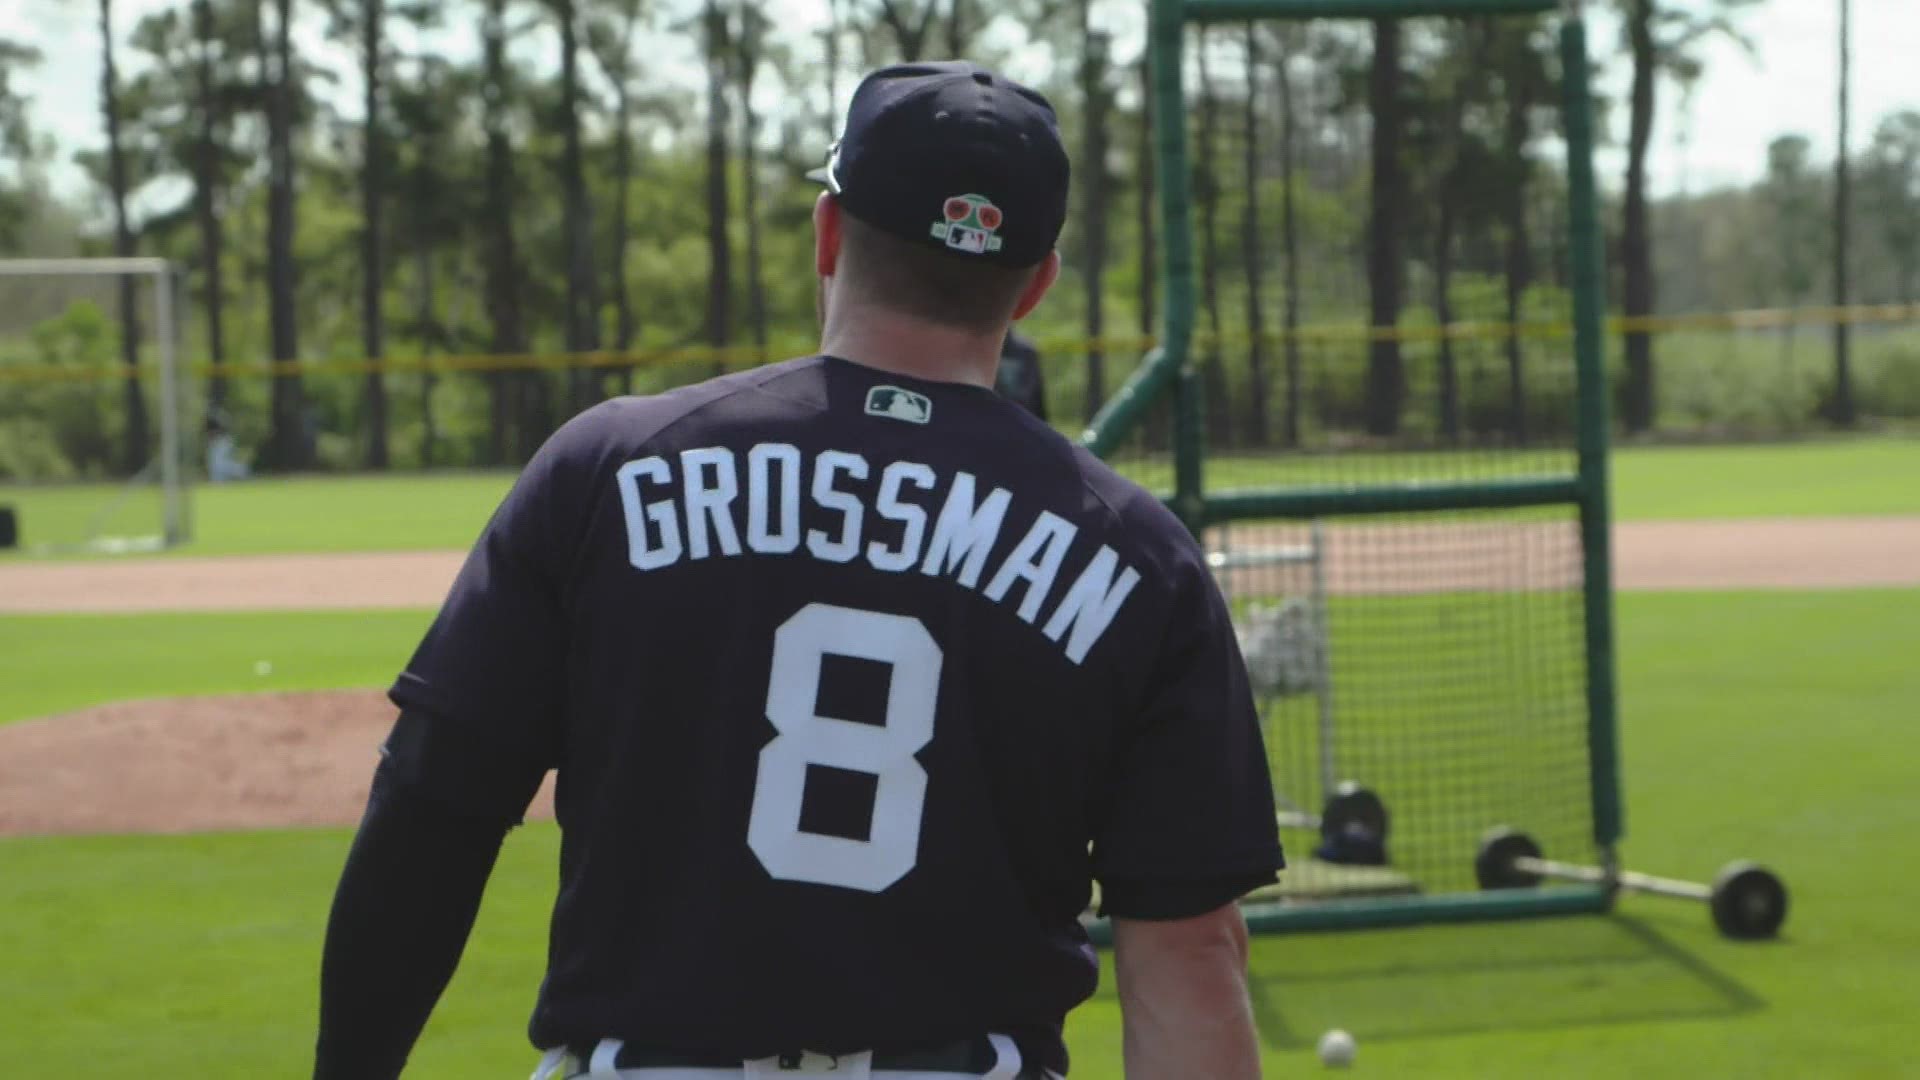 Last month the Tigers signed Grossman to a two year, 10 million dollar deal.